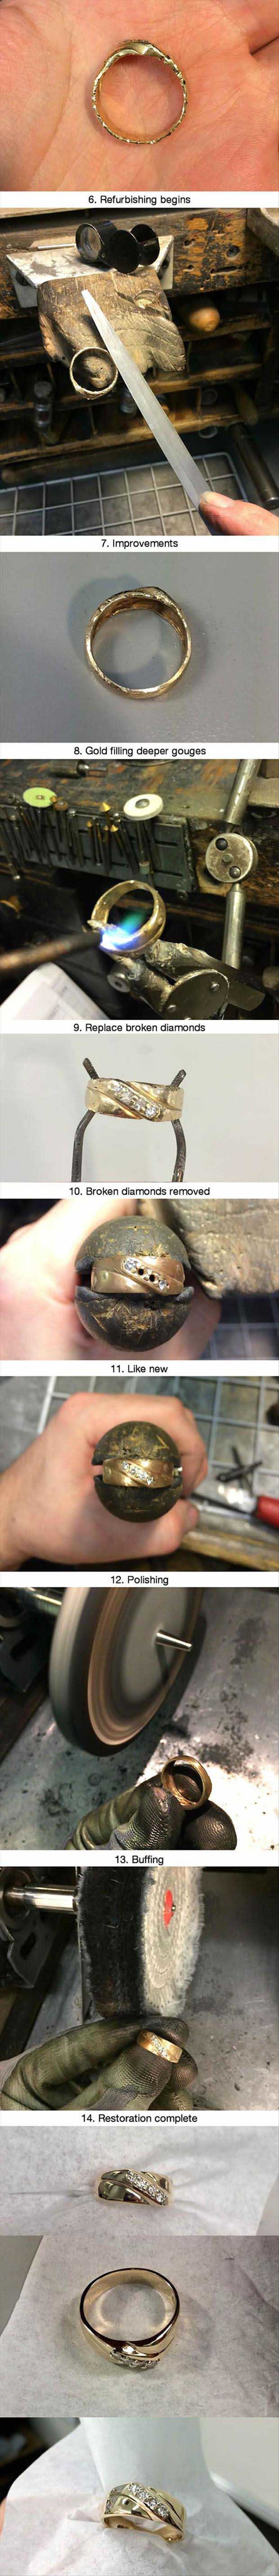 How to fix wedding ring